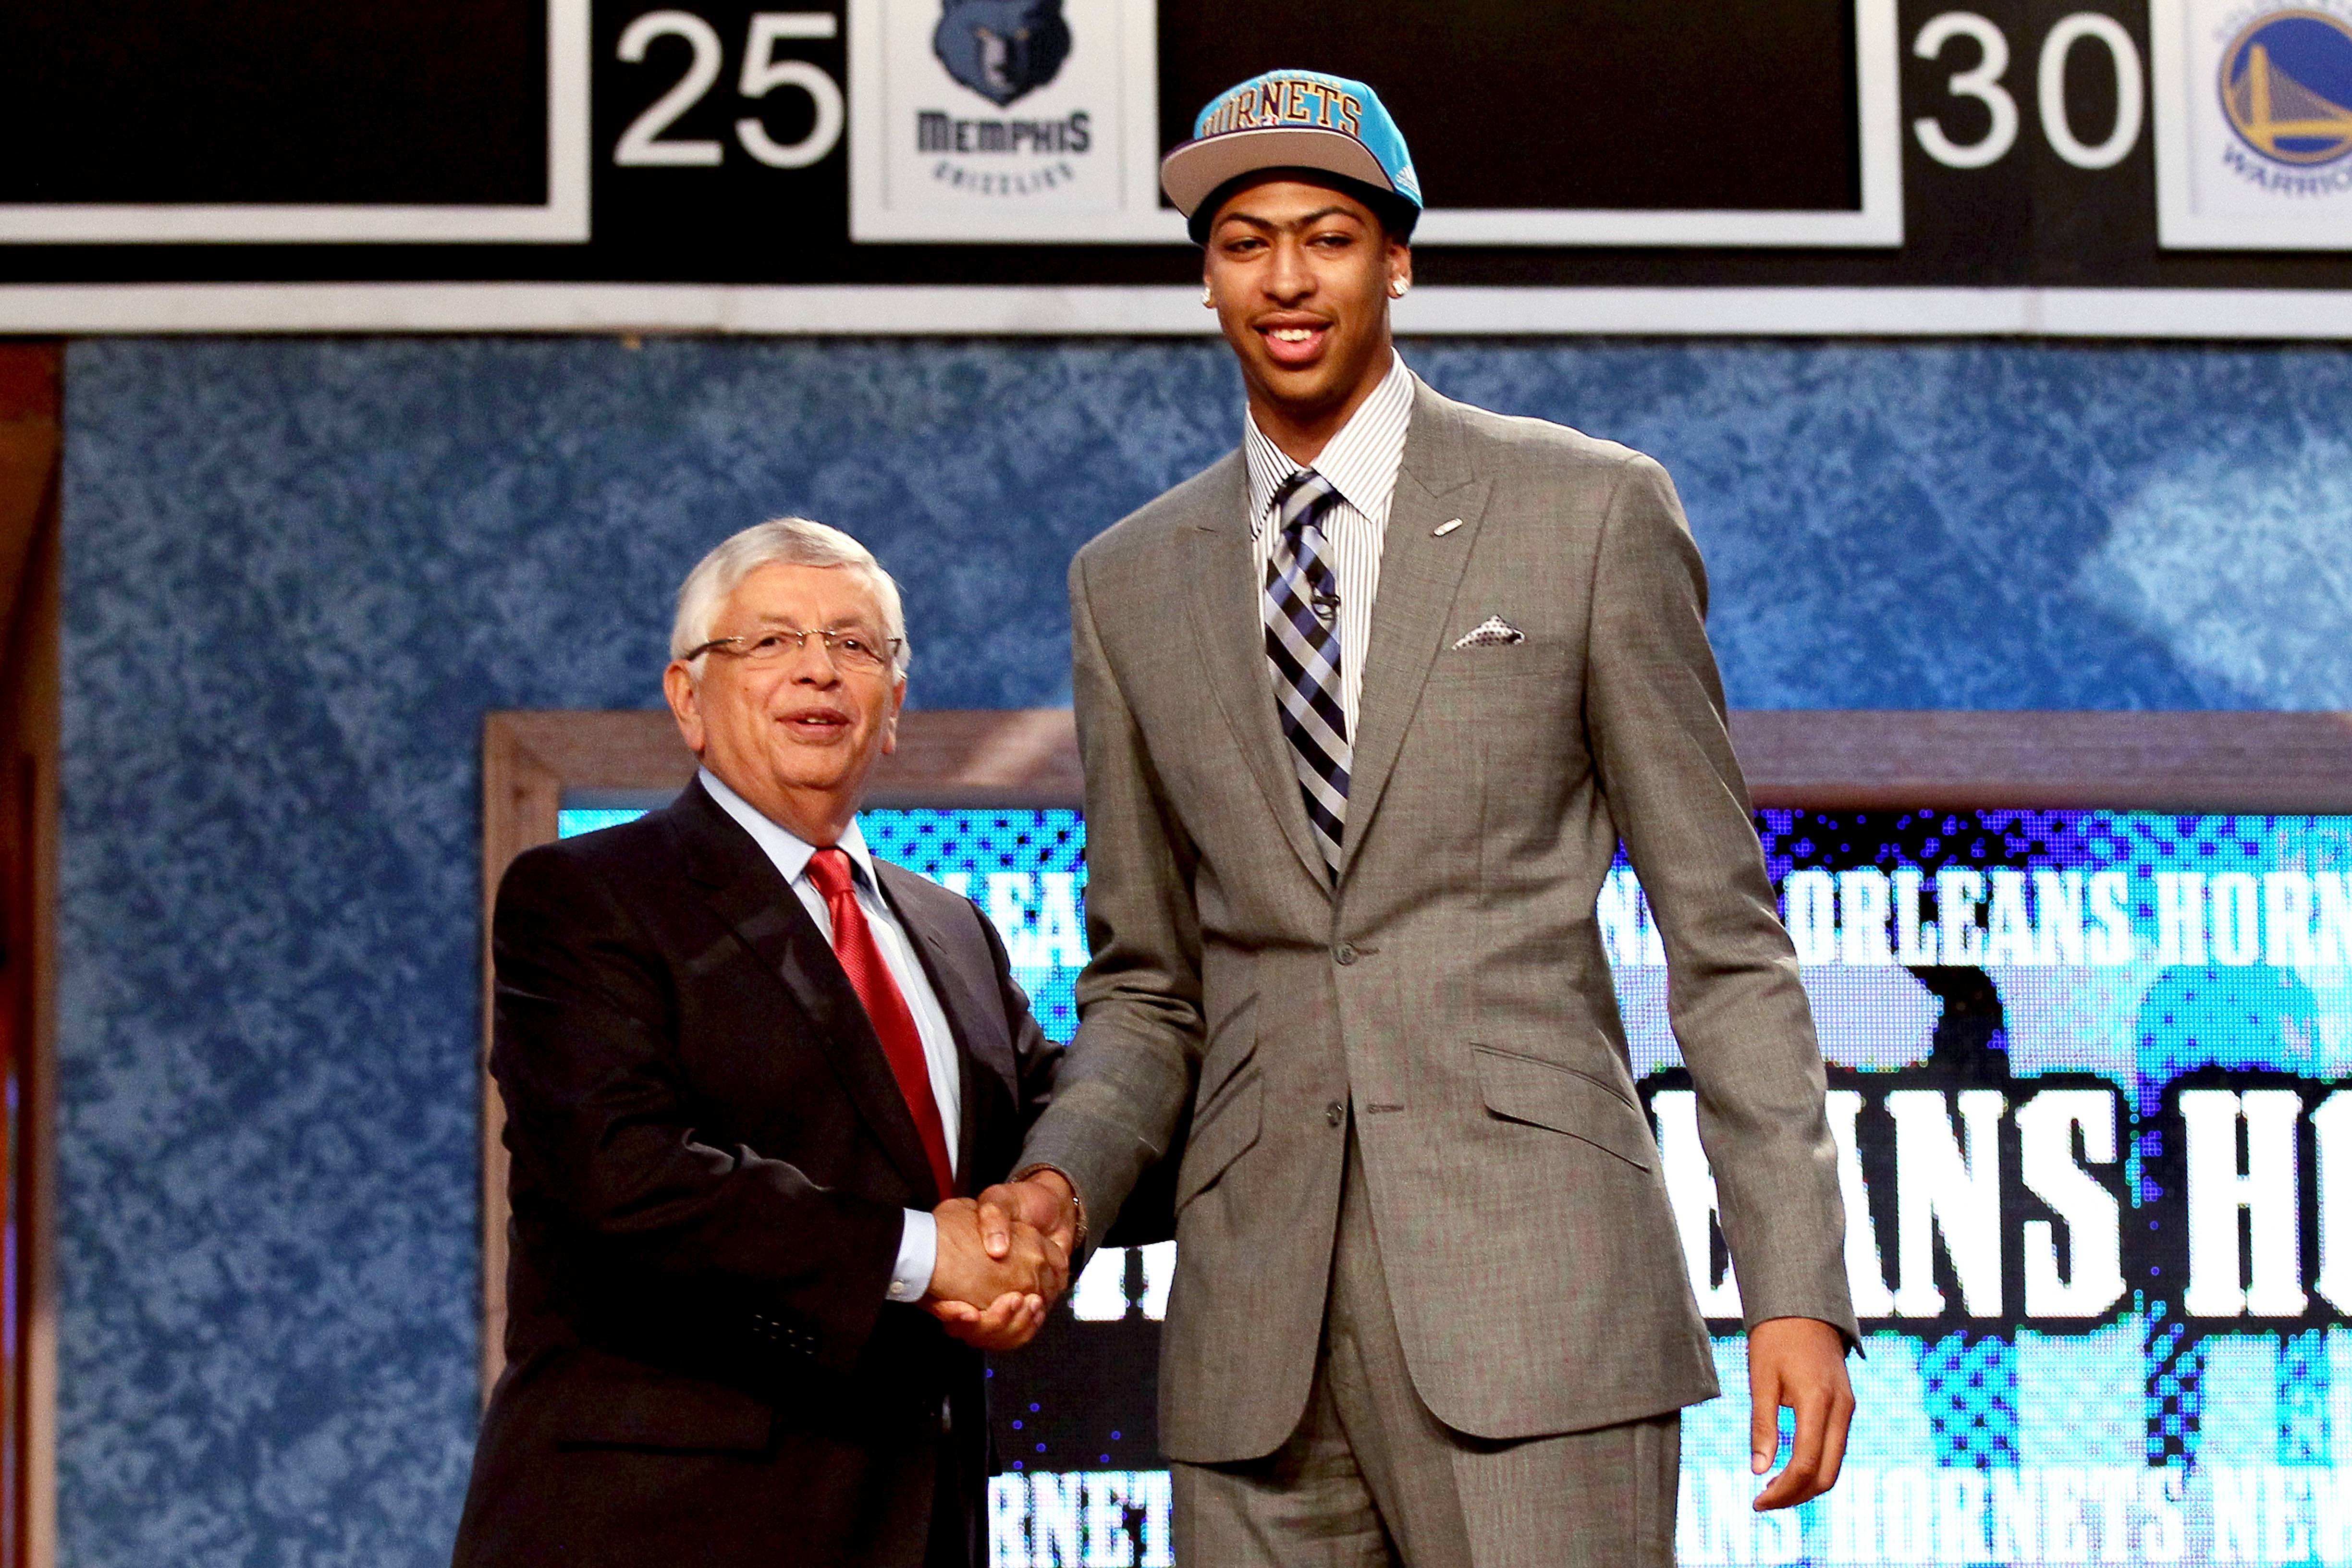 Anthony Davis - Meet the new class of NBA superstars. From Anthony Davis and his unibrow to Kendall Marshall and his passing skills, BET.com looks at the top 15 players picked at the first round of the 2012 NBA Draft. —Deborah Creighton SkinnerAnthony Davis of the Kentucky Wildcats greets NBA Commissioner David Stern. As expected, Davis was selected No. 1 overall by the New Orleans Hornets at the draft held in Newark, New Jersey.(Photo: Elsa/Getty Images)